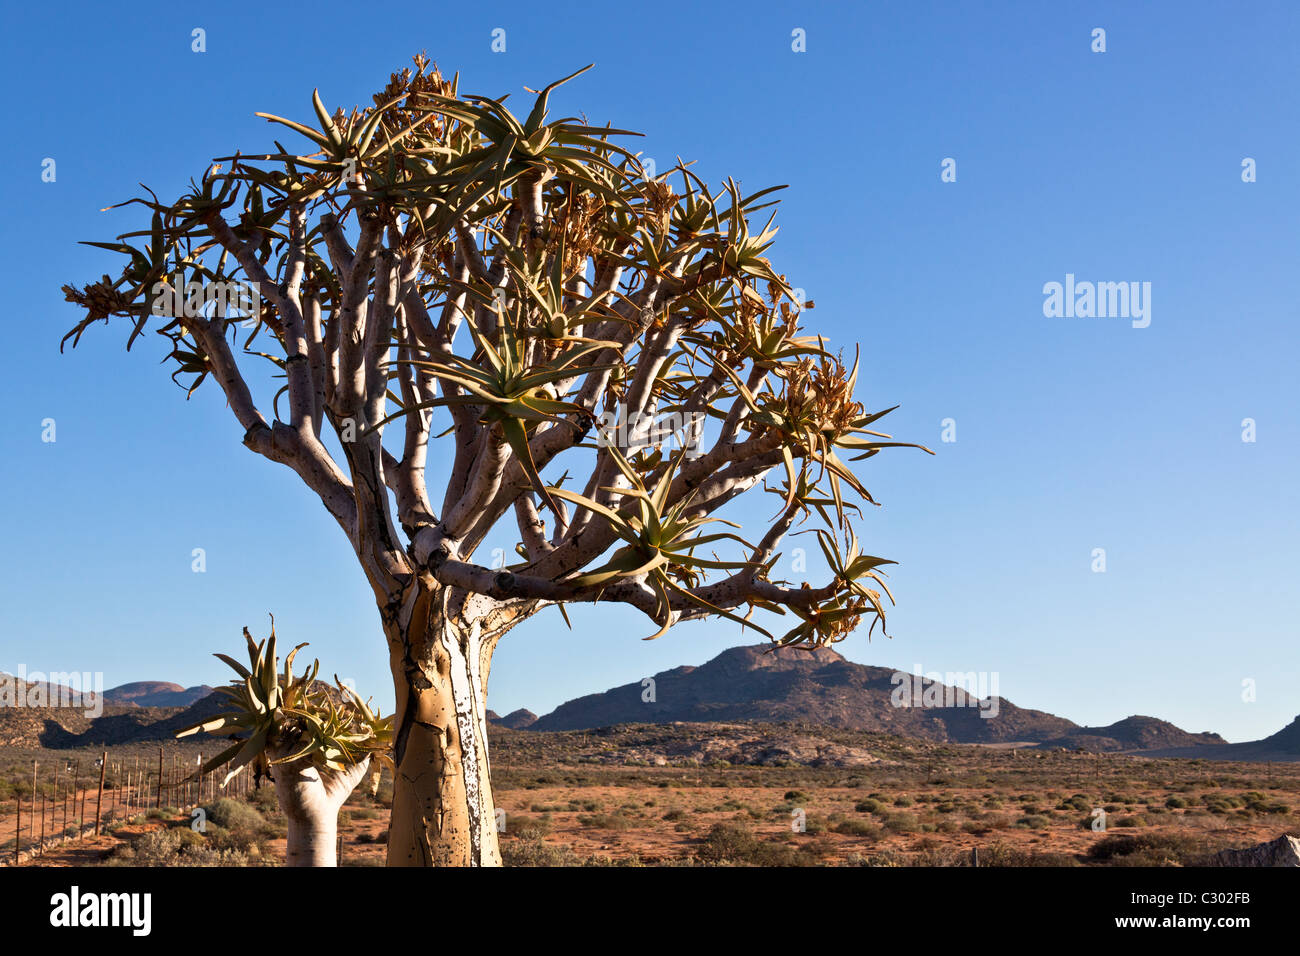 The Kokerboom or Quiver Tree (Aloe dichotoma) in the arid northeastern Karoo in South Africa Stock Photo